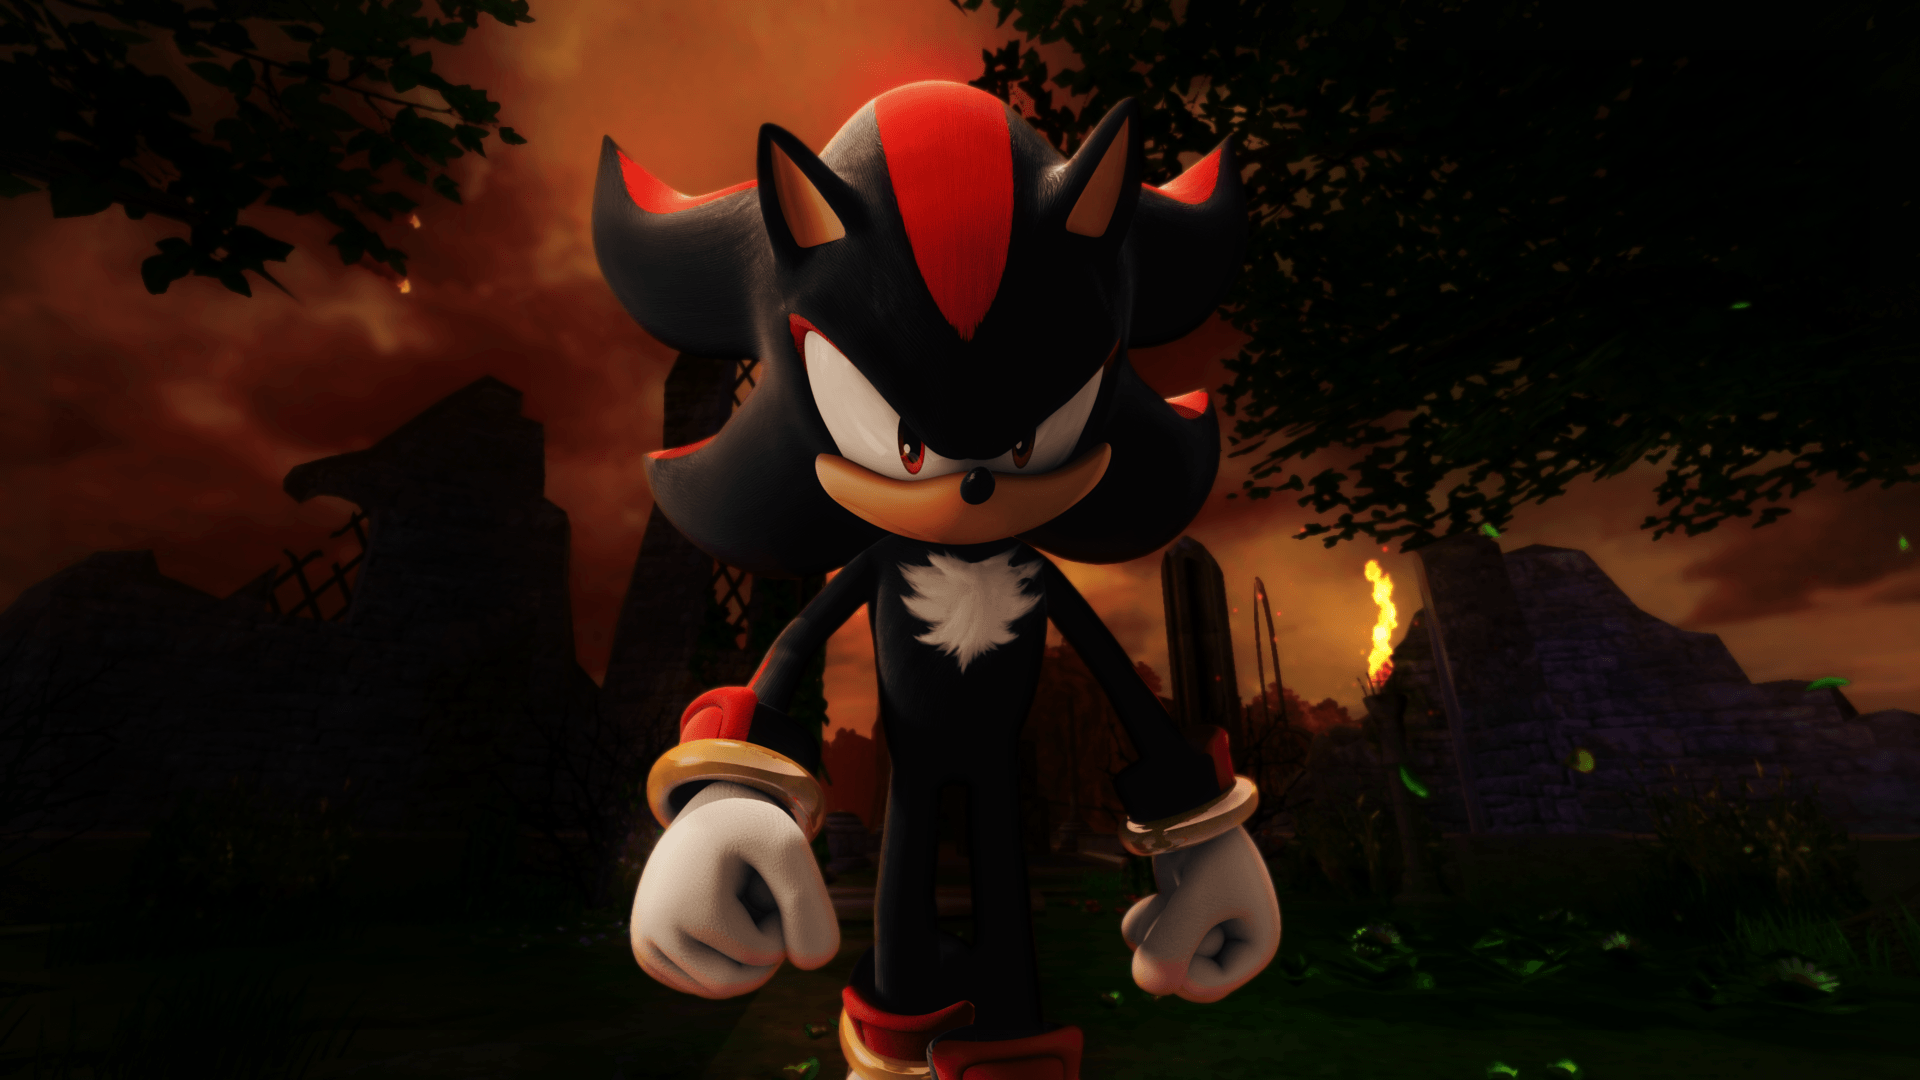 Download Free Shadow the Hedgehog Wallpapers.